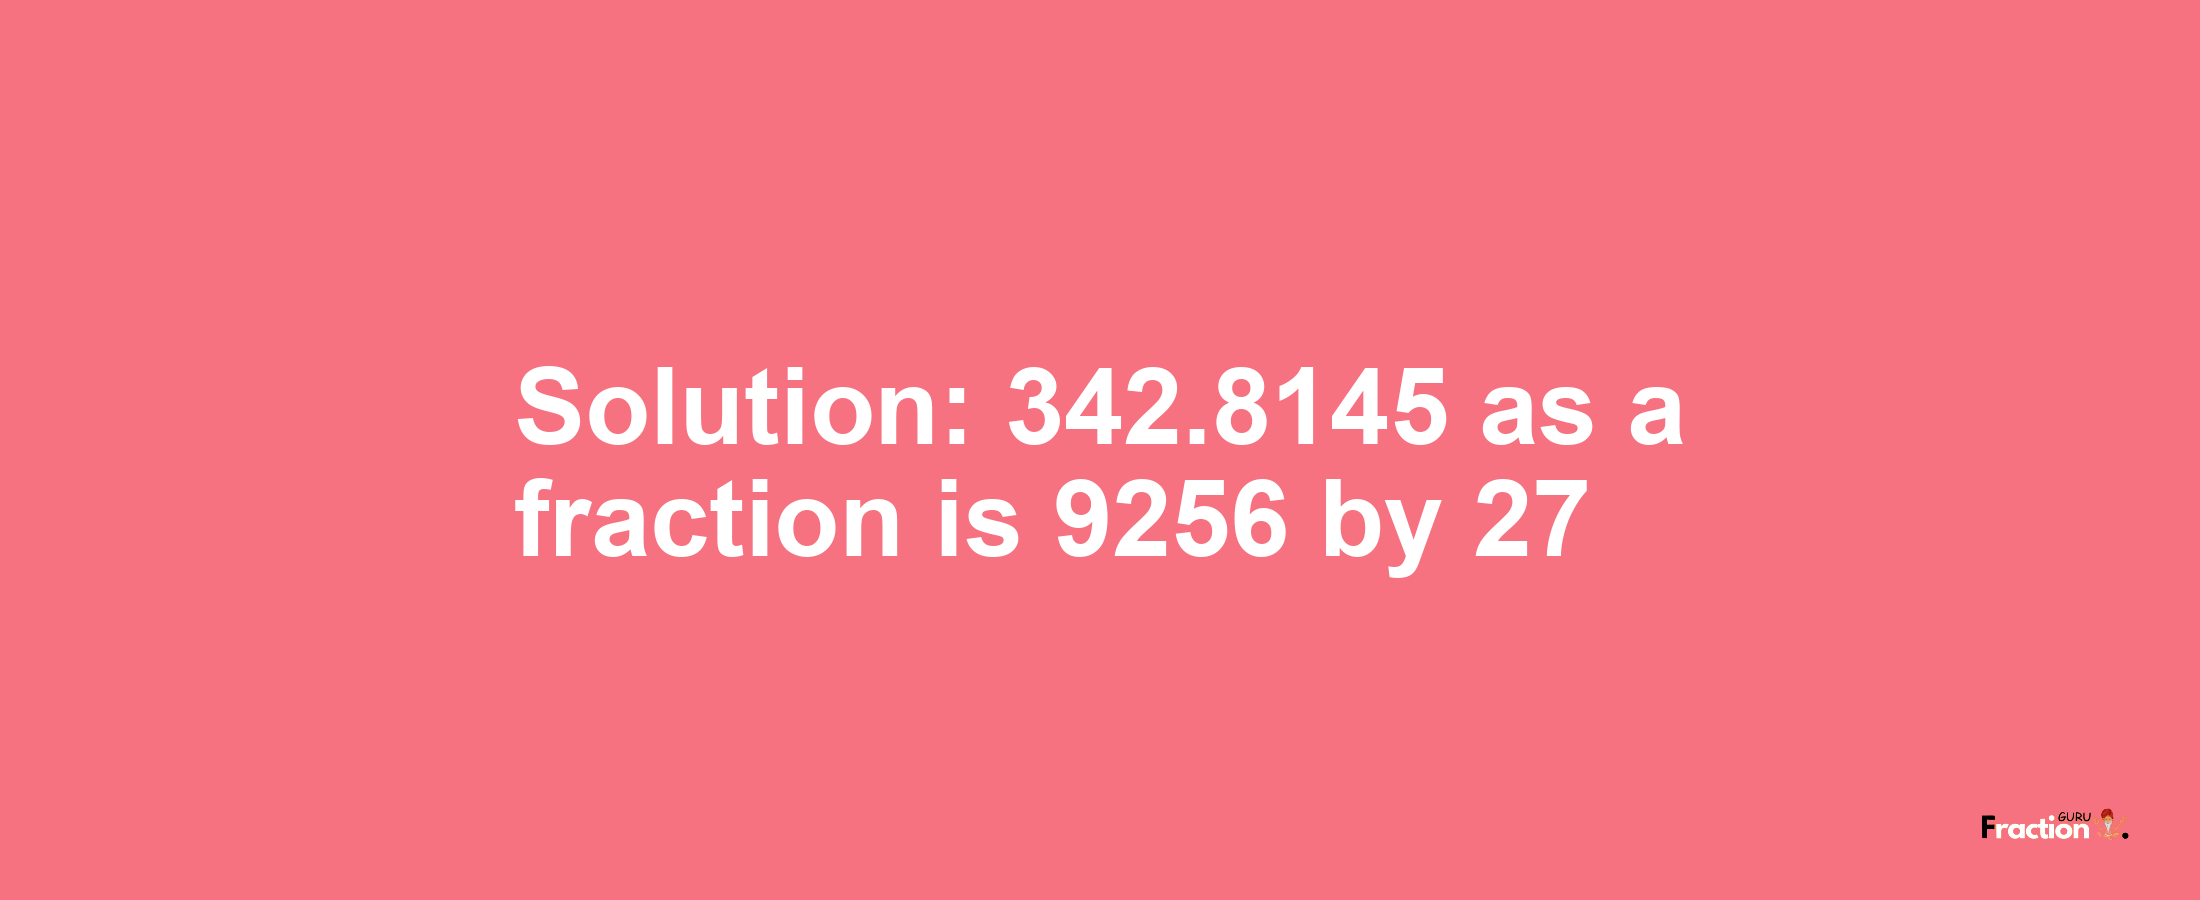 Solution:342.8145 as a fraction is 9256/27